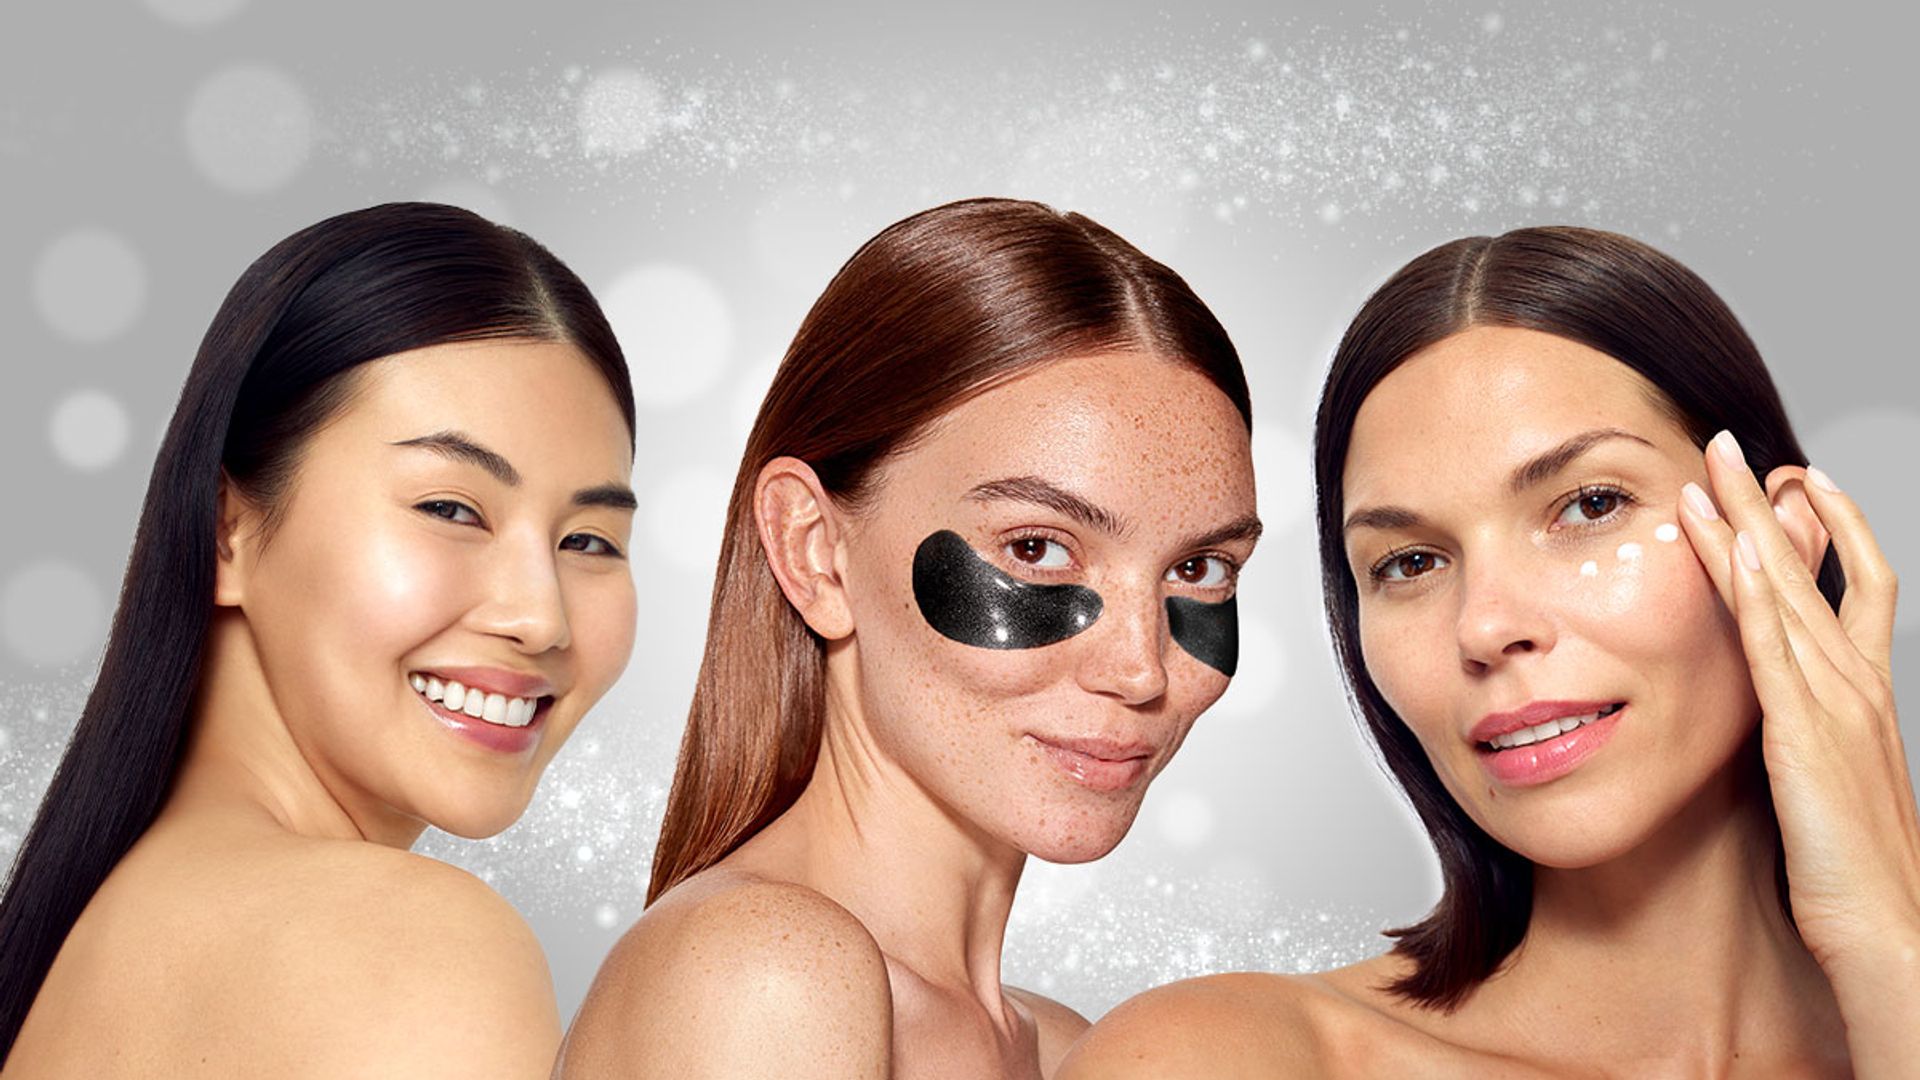 Three models prepping their skin for Christmas parties